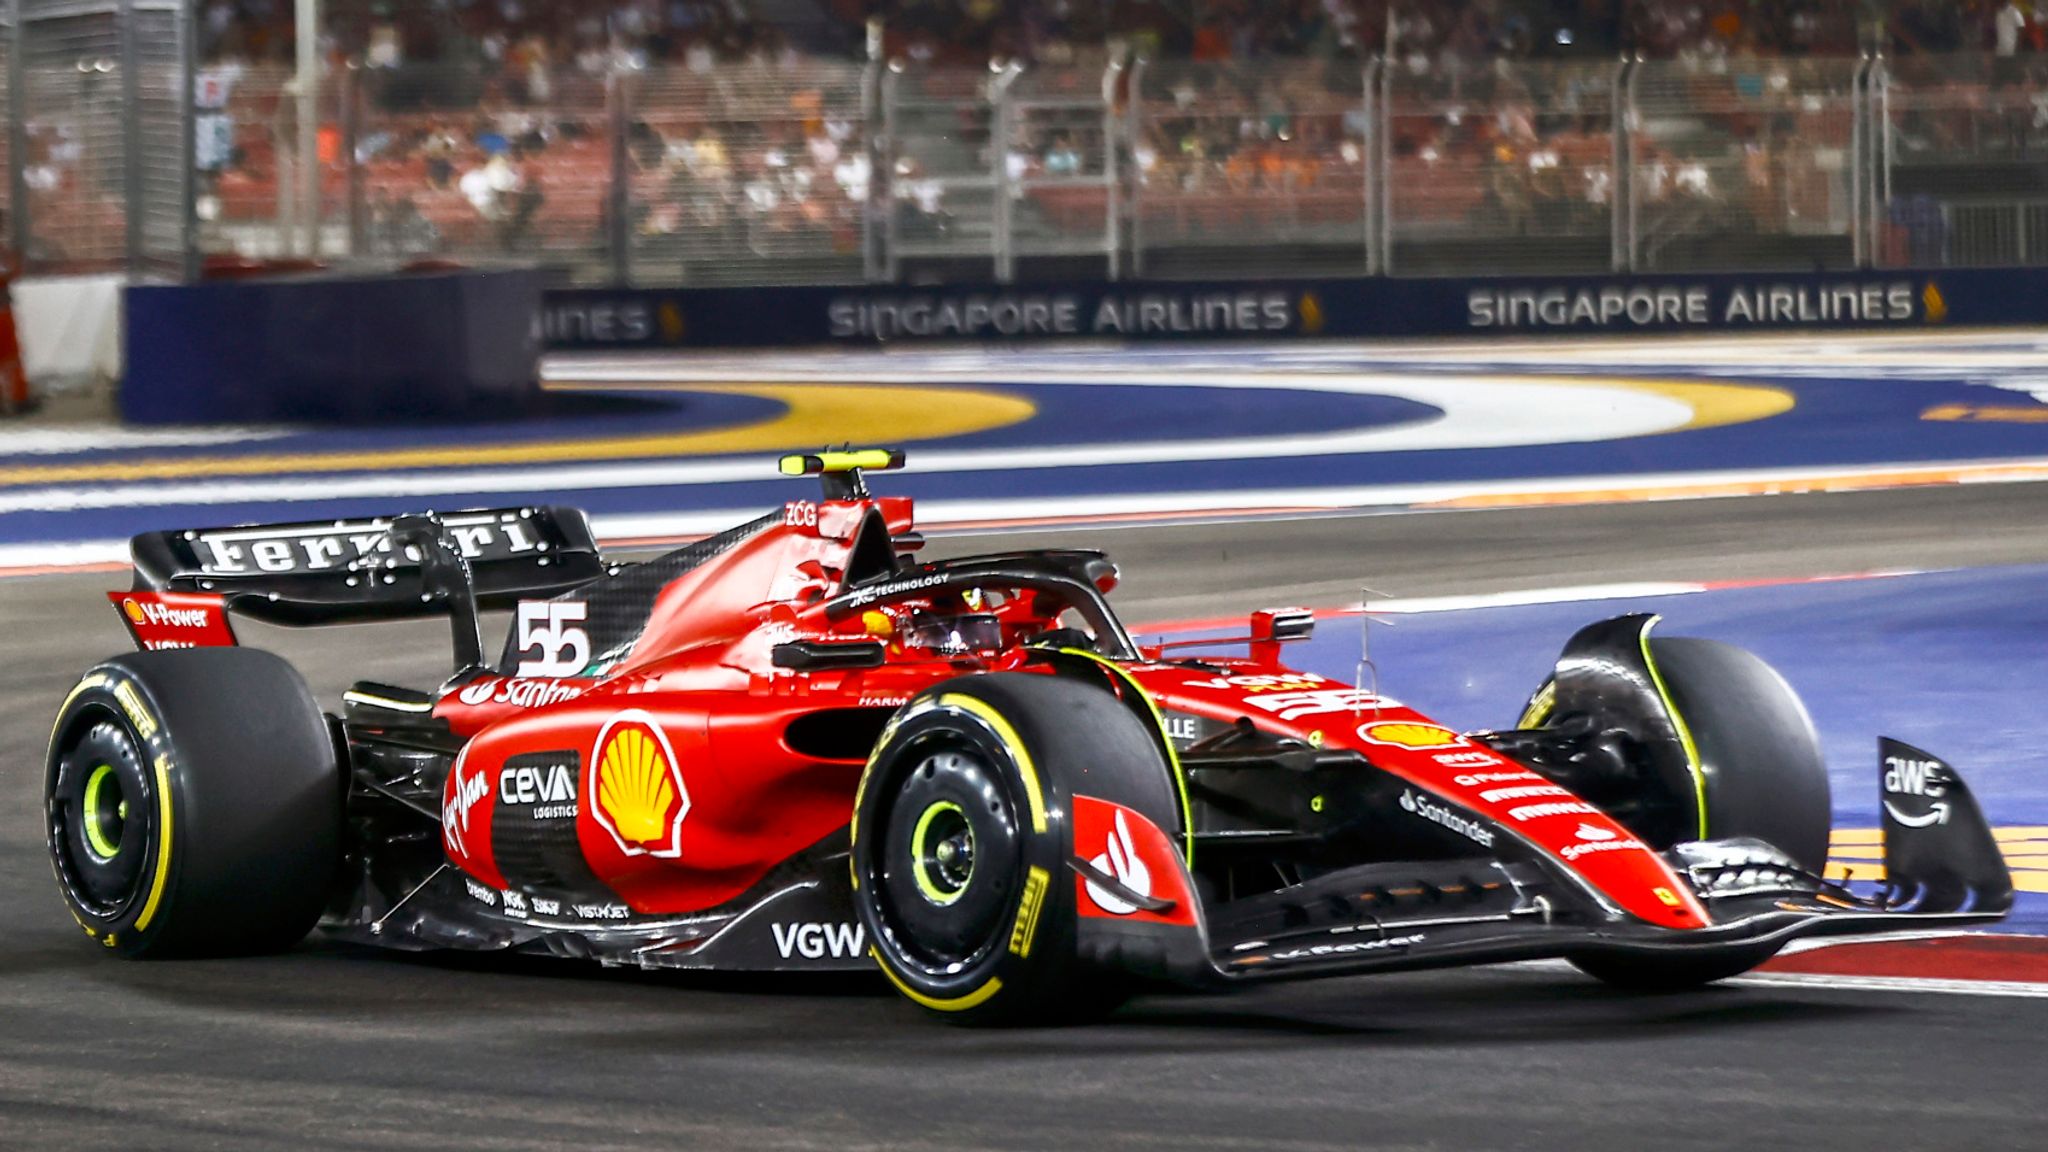 2022 F1 world championship standings after the Singapore GP